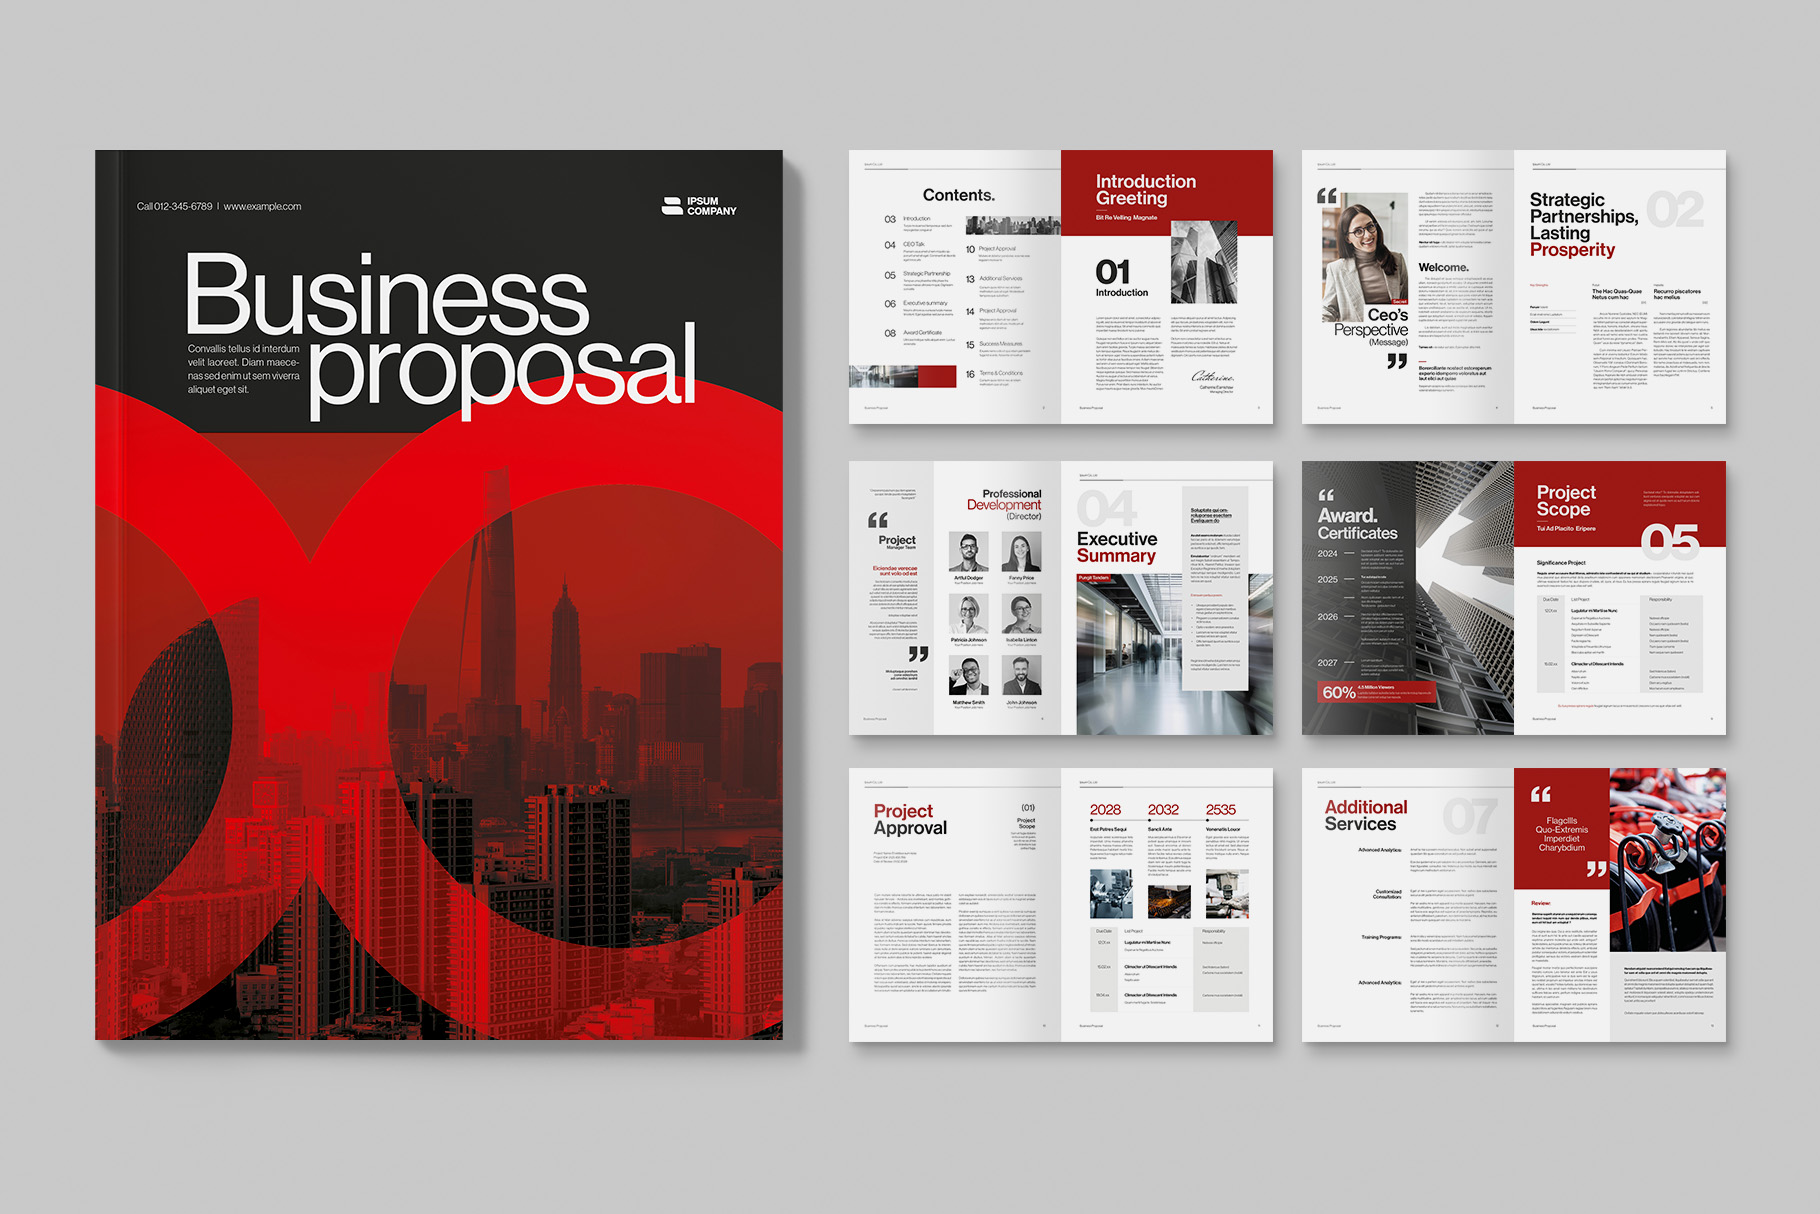 Business Proposal Template in INDD format